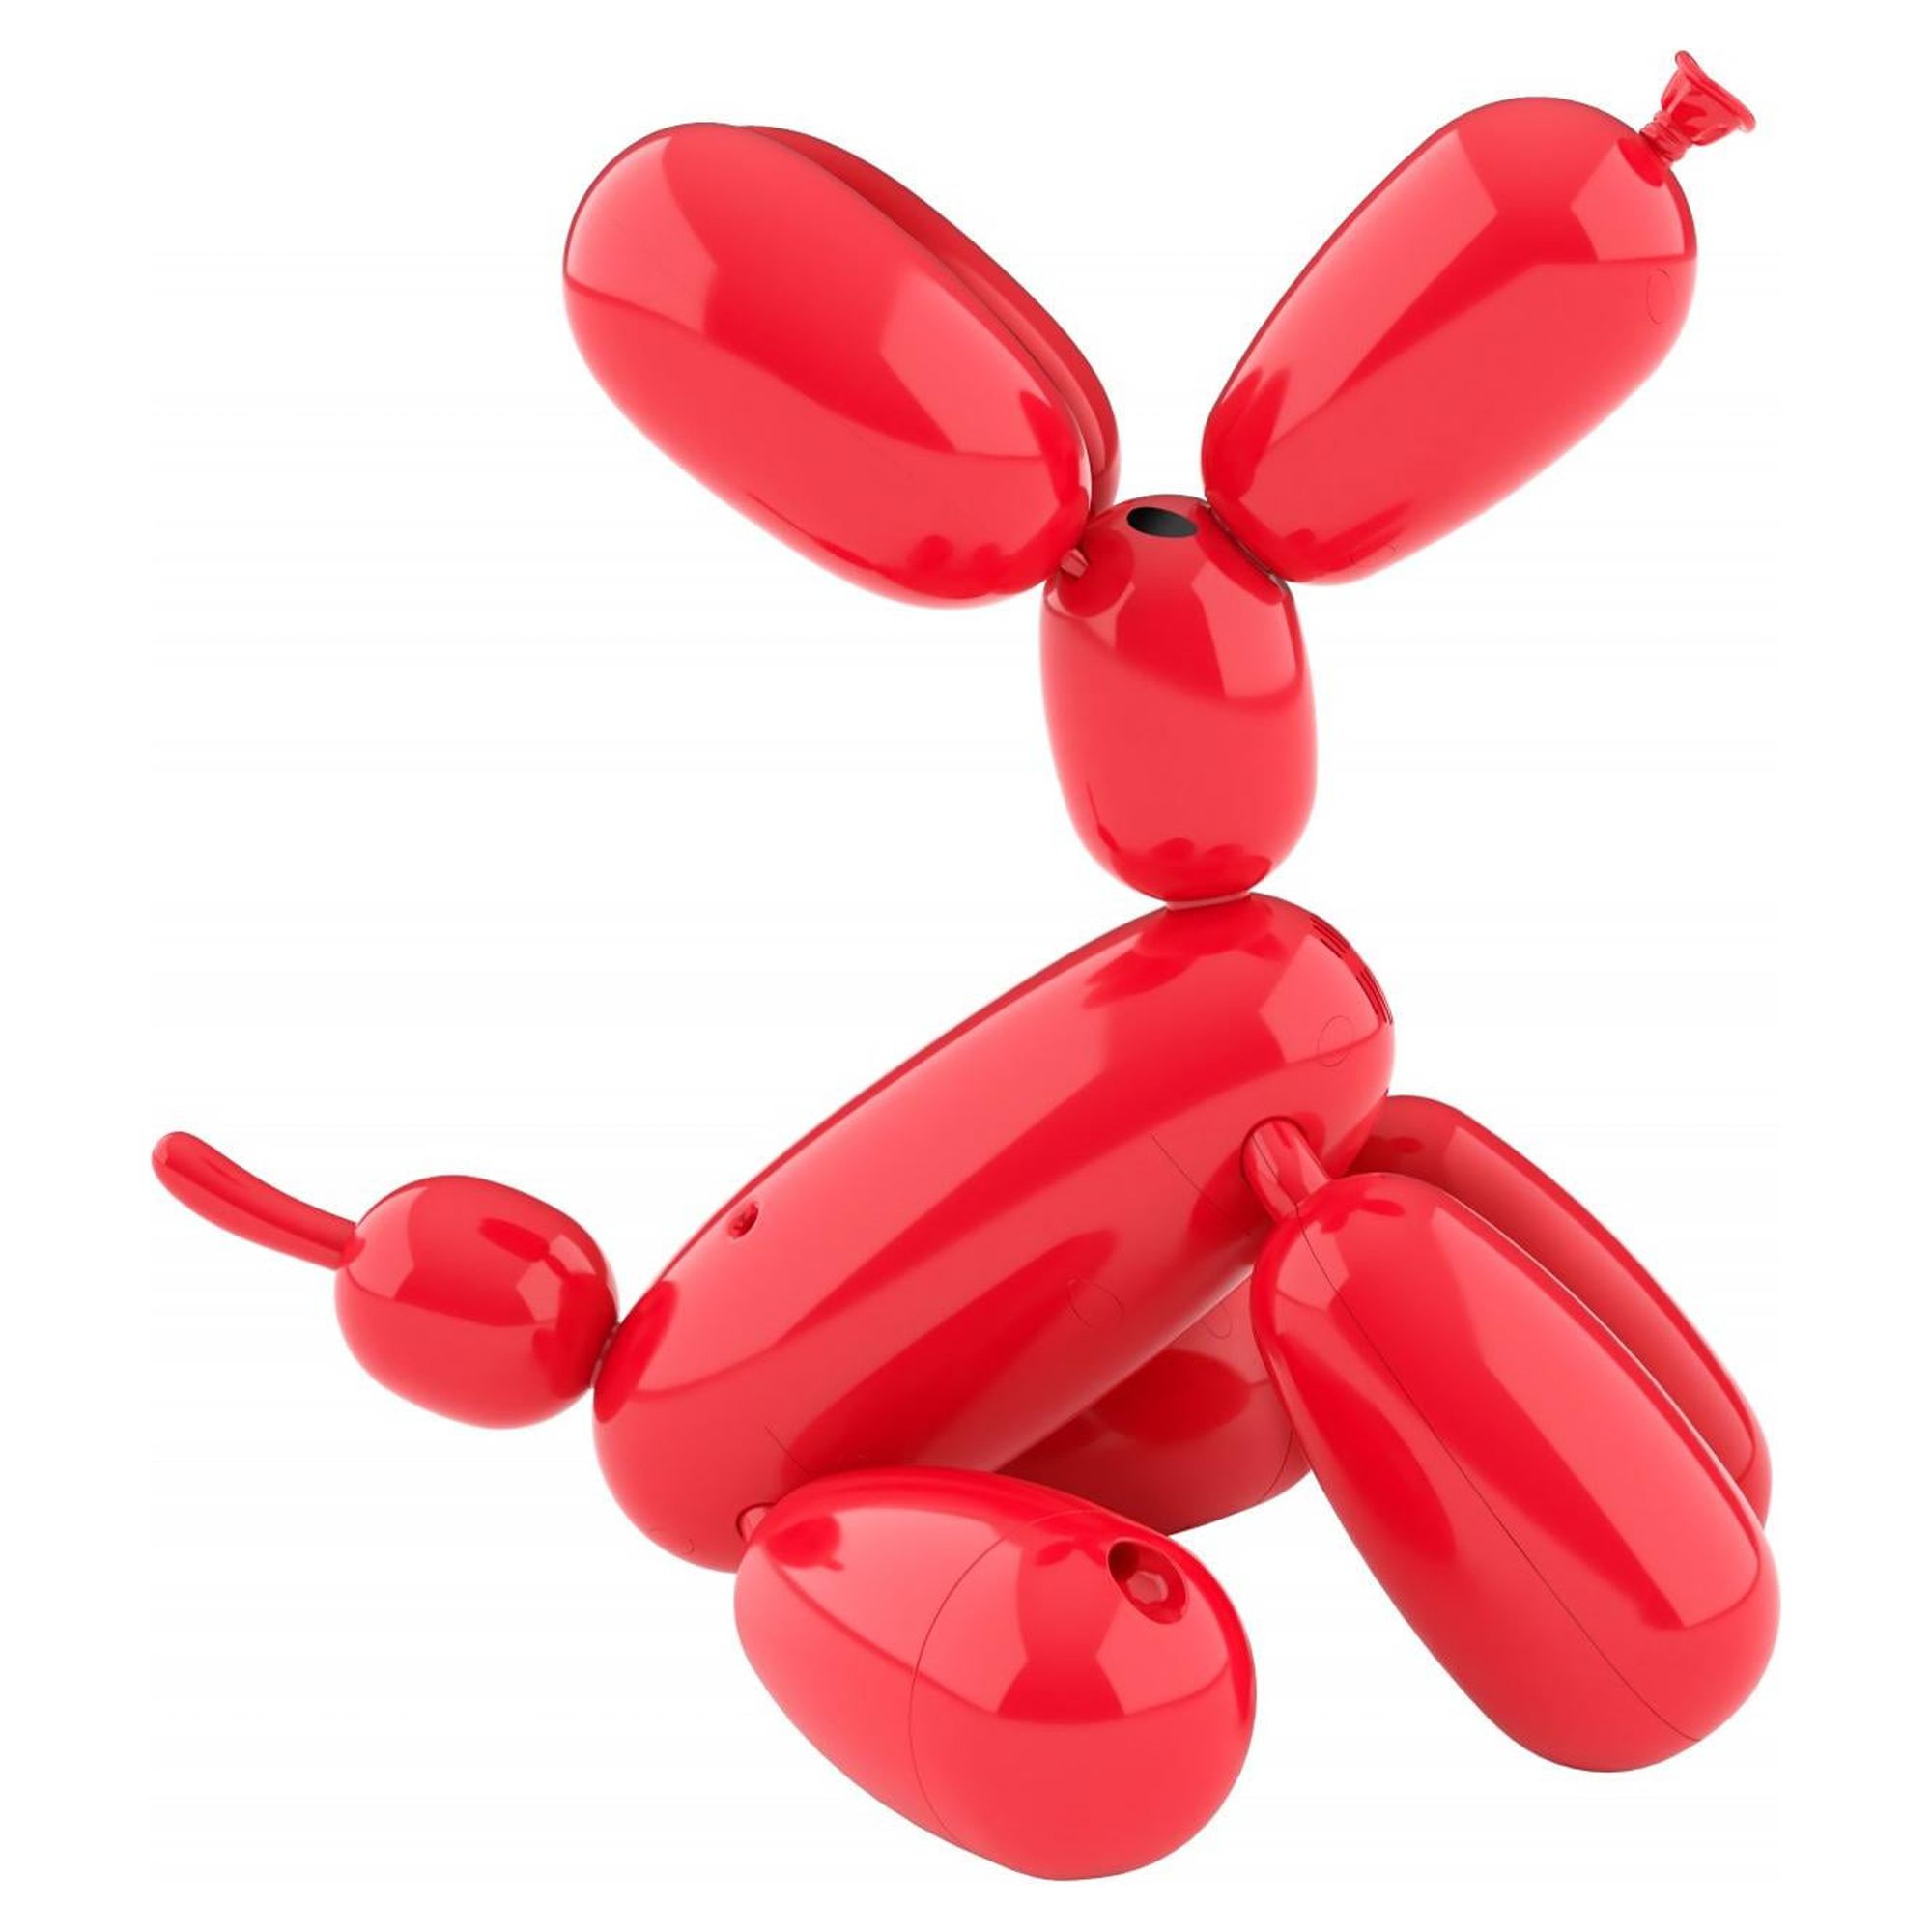 Squeakee the Balloon Dog - Makes Sound, Deflates, and Does Tricks! - Electronic Pets - image 5 of 17